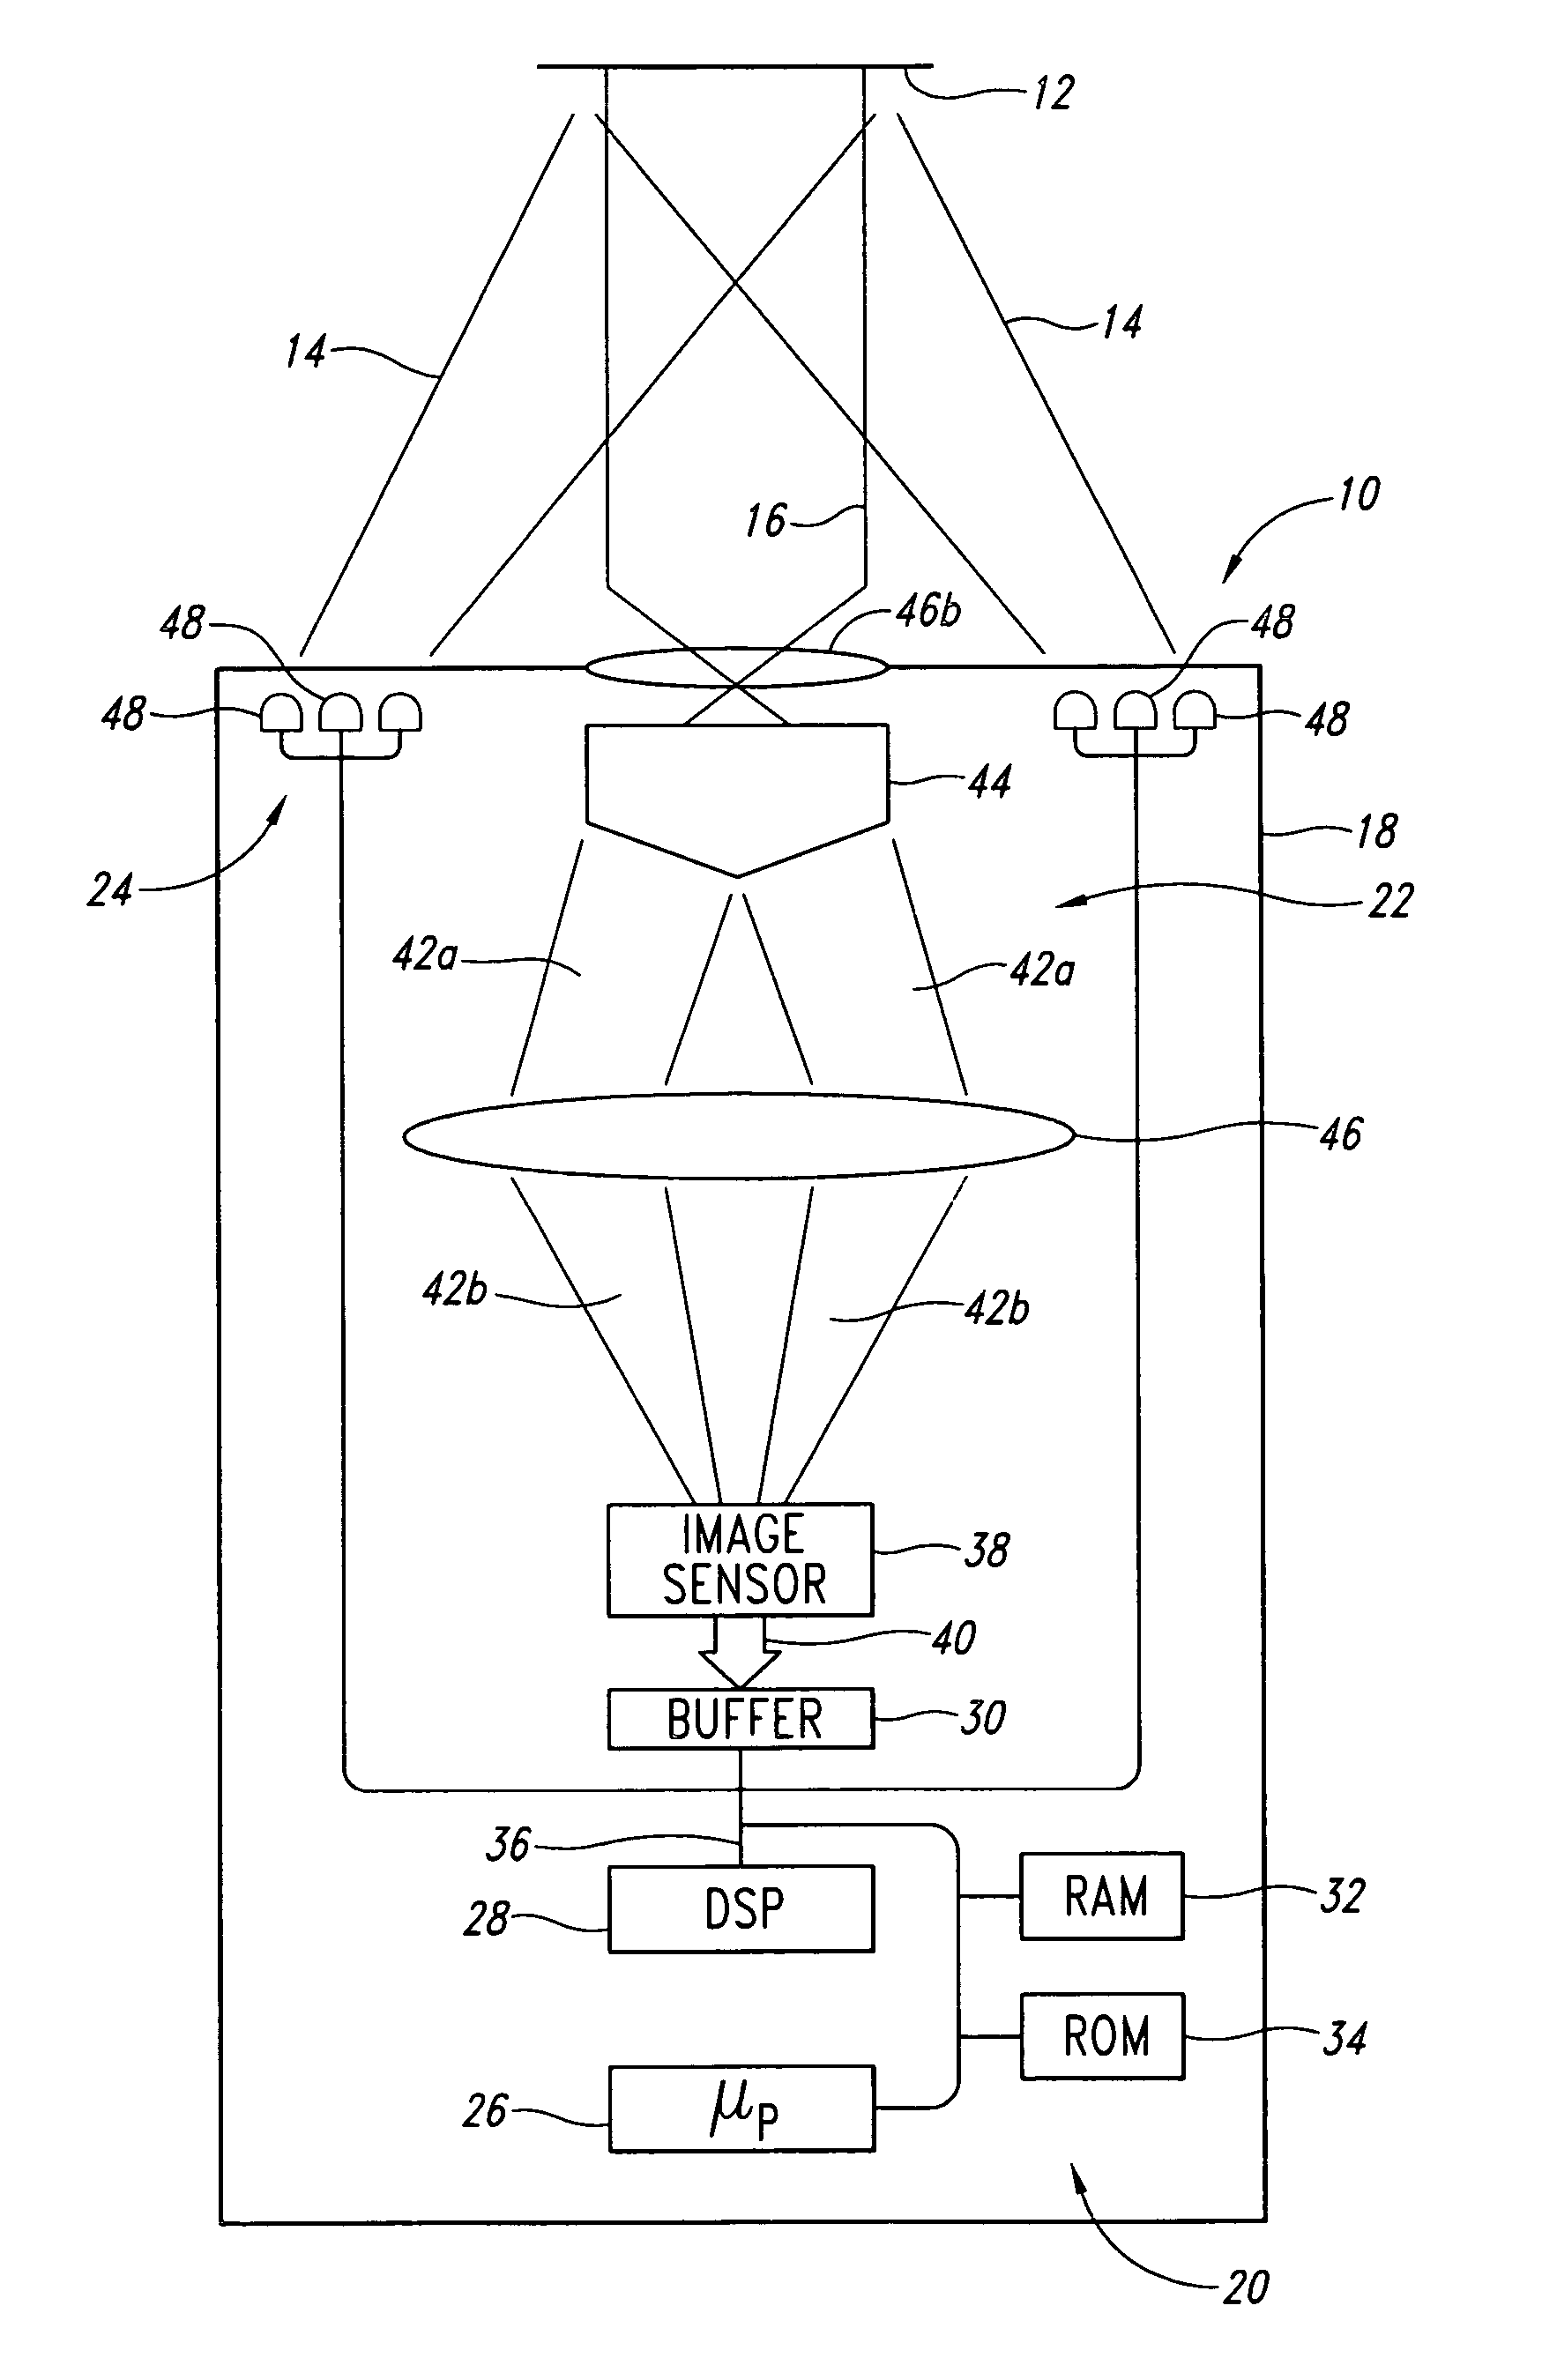 Optoelectronic reader and method for reading machine-readable symbols